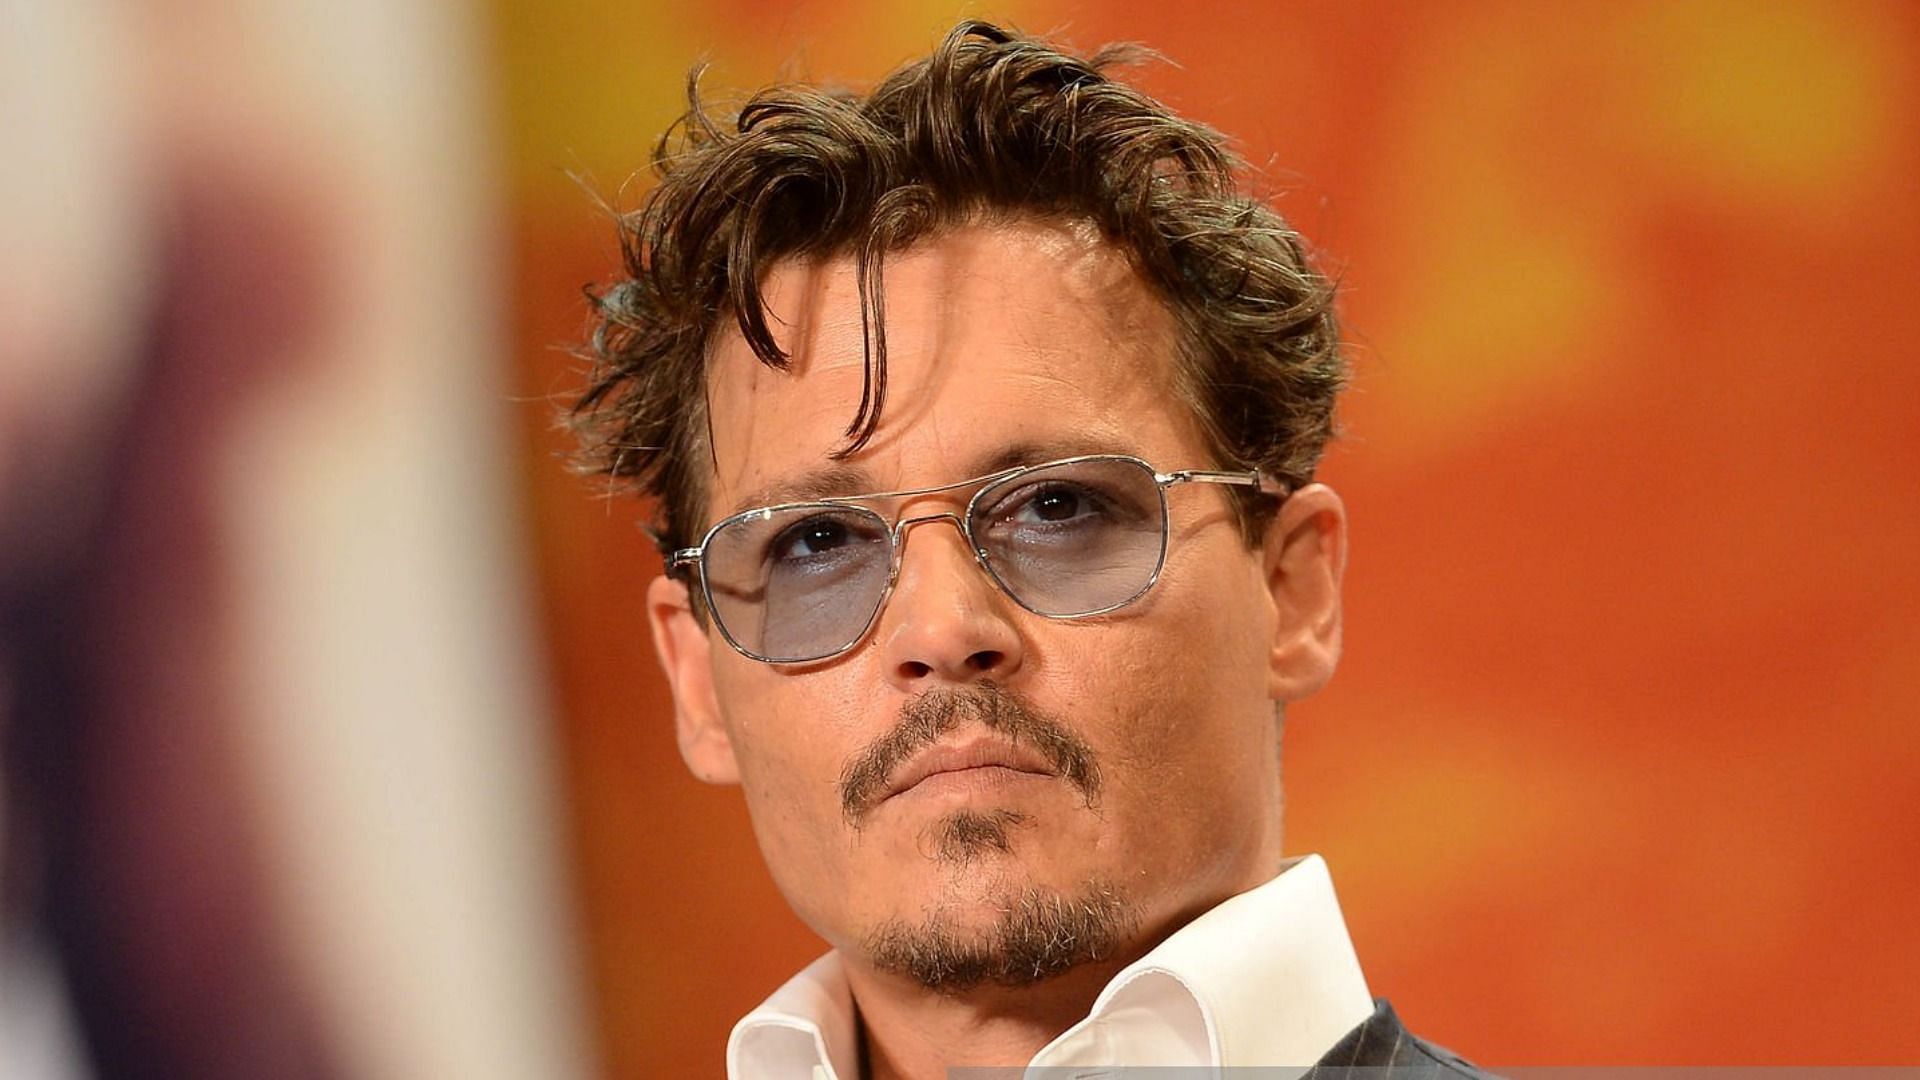 Johnny Depp reportedly lost his multi-million dollar fortune over the years (Image via Getty Images)